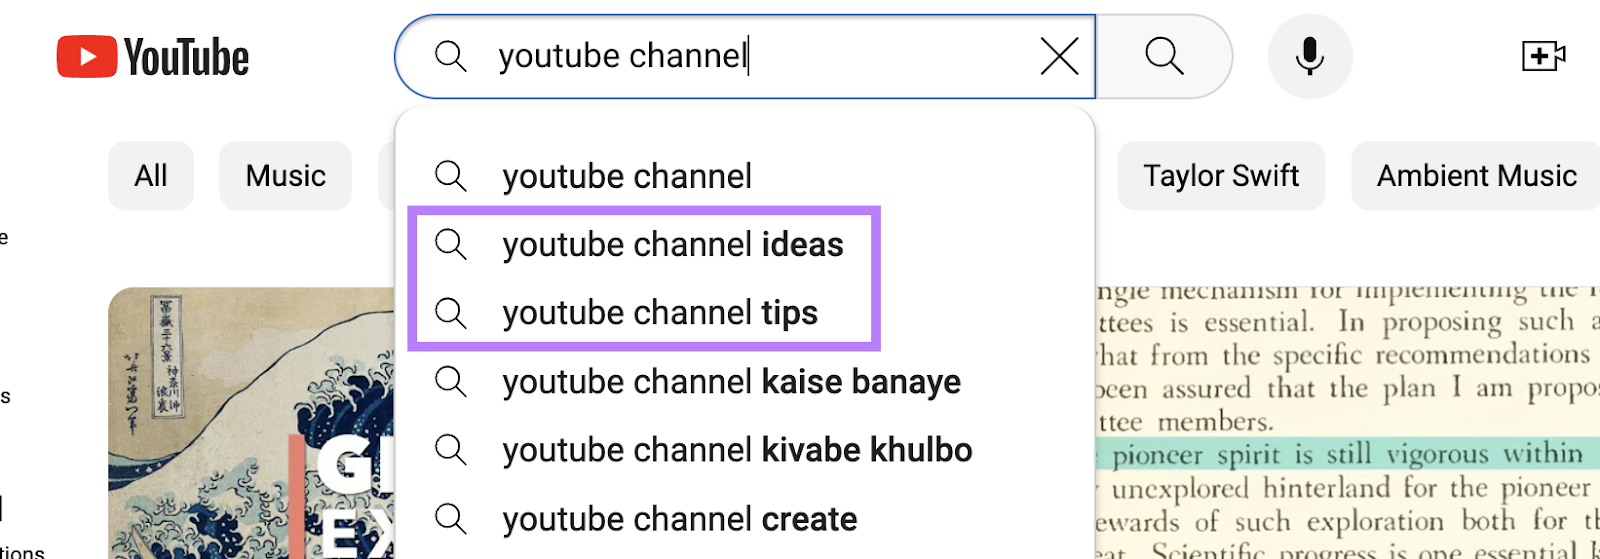 YouTube search suggestions for “youtube channel”